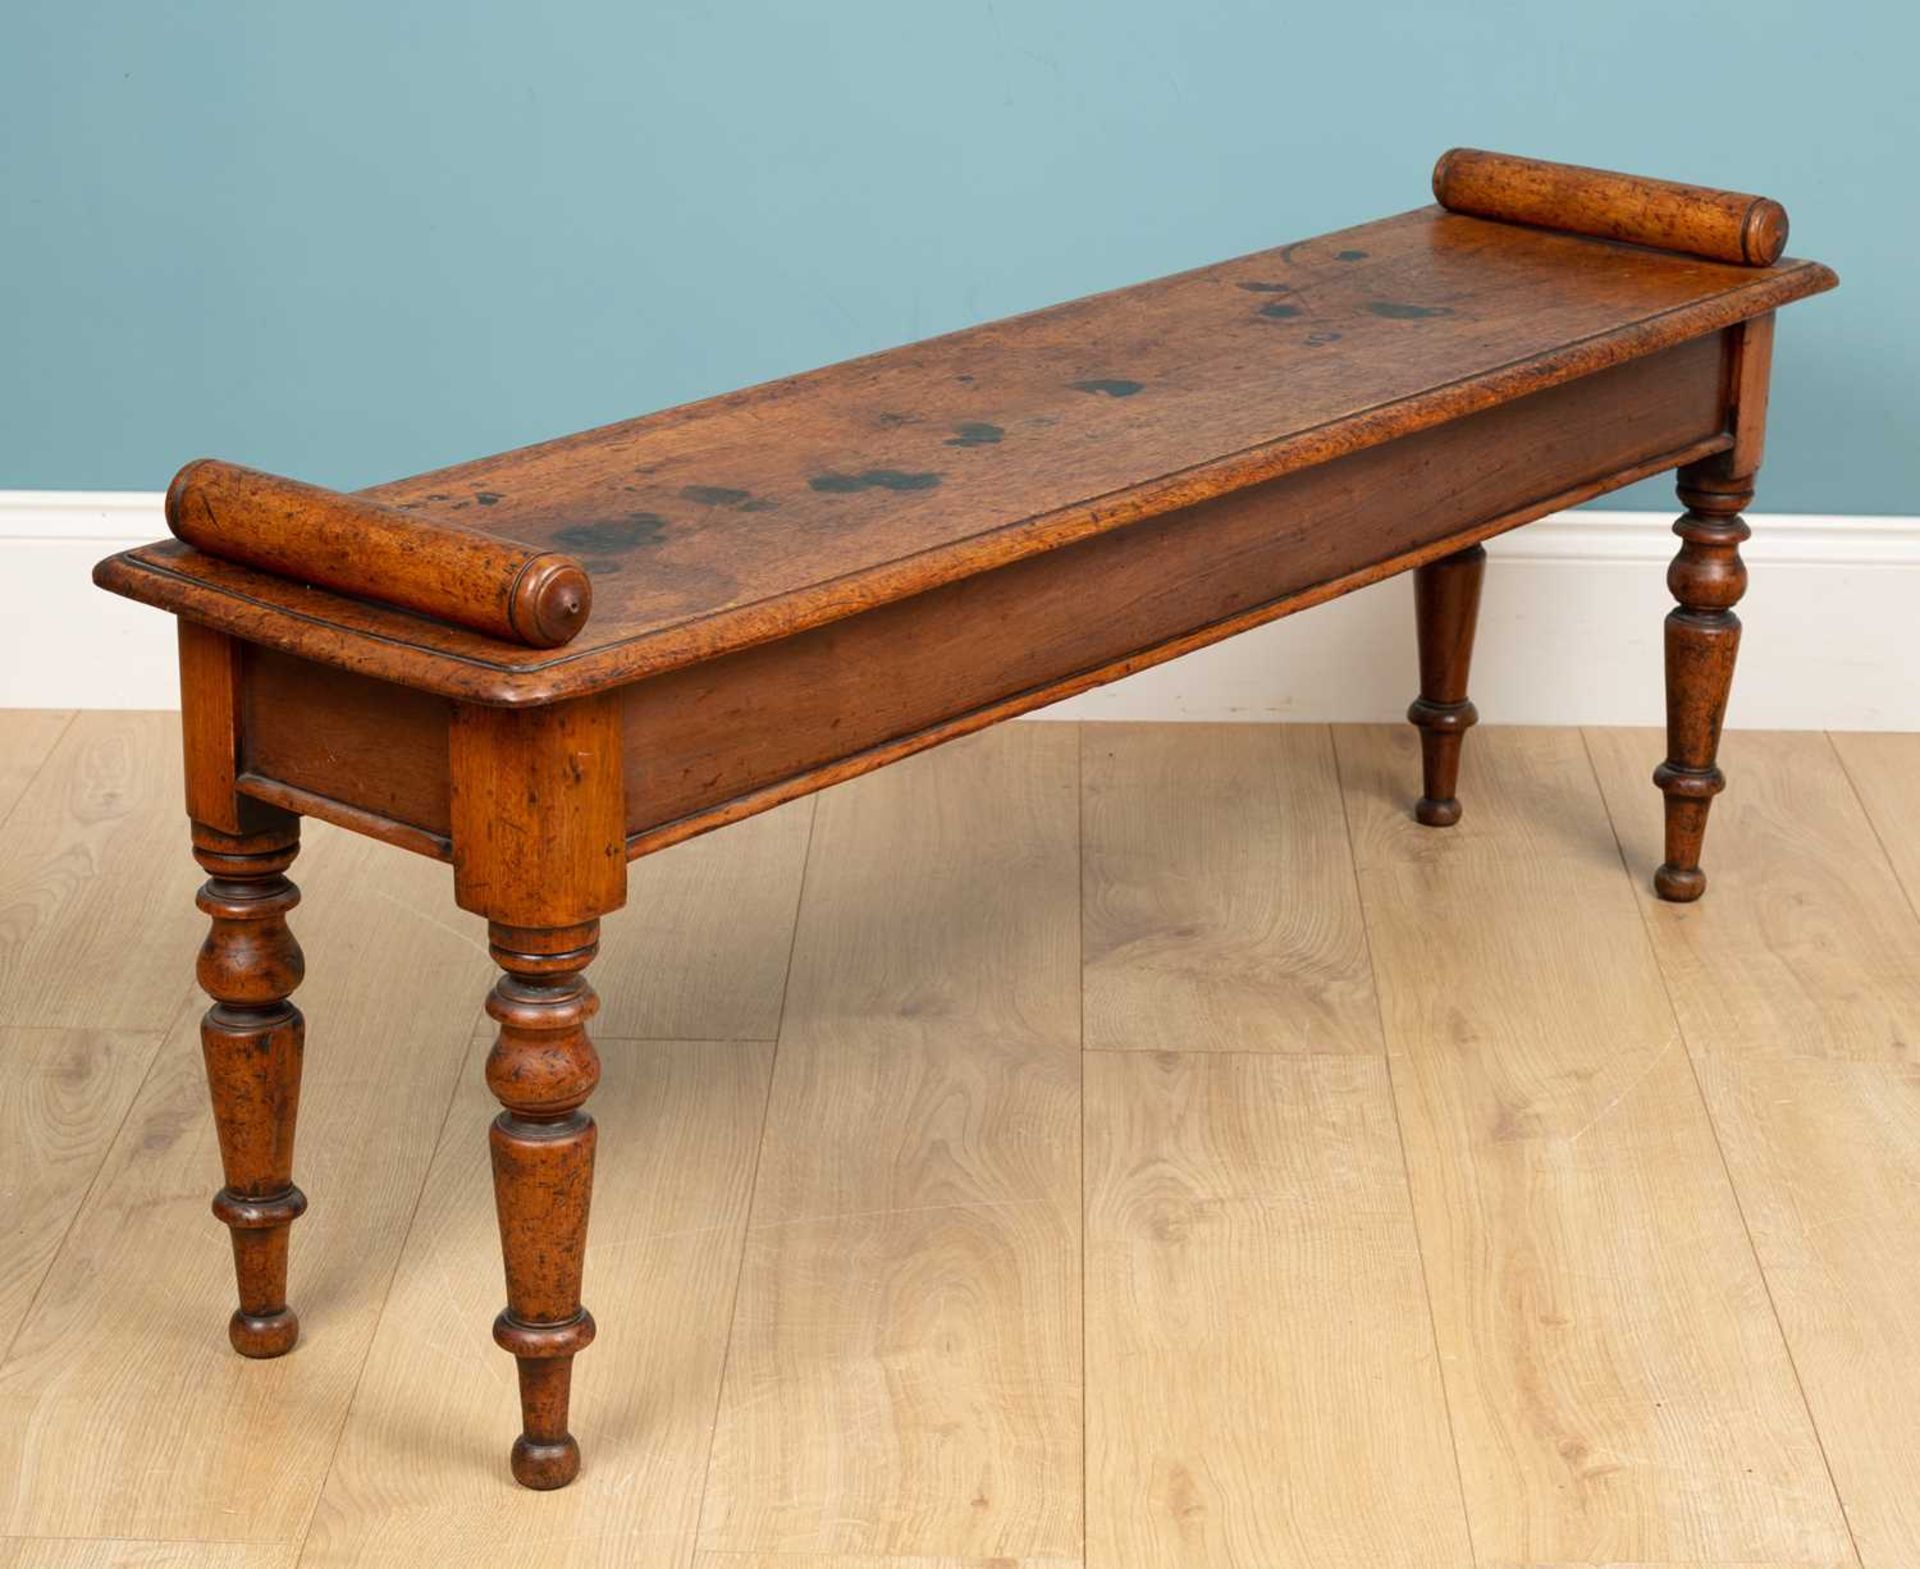 A mid-Victorian mahogany hall bench or window seat